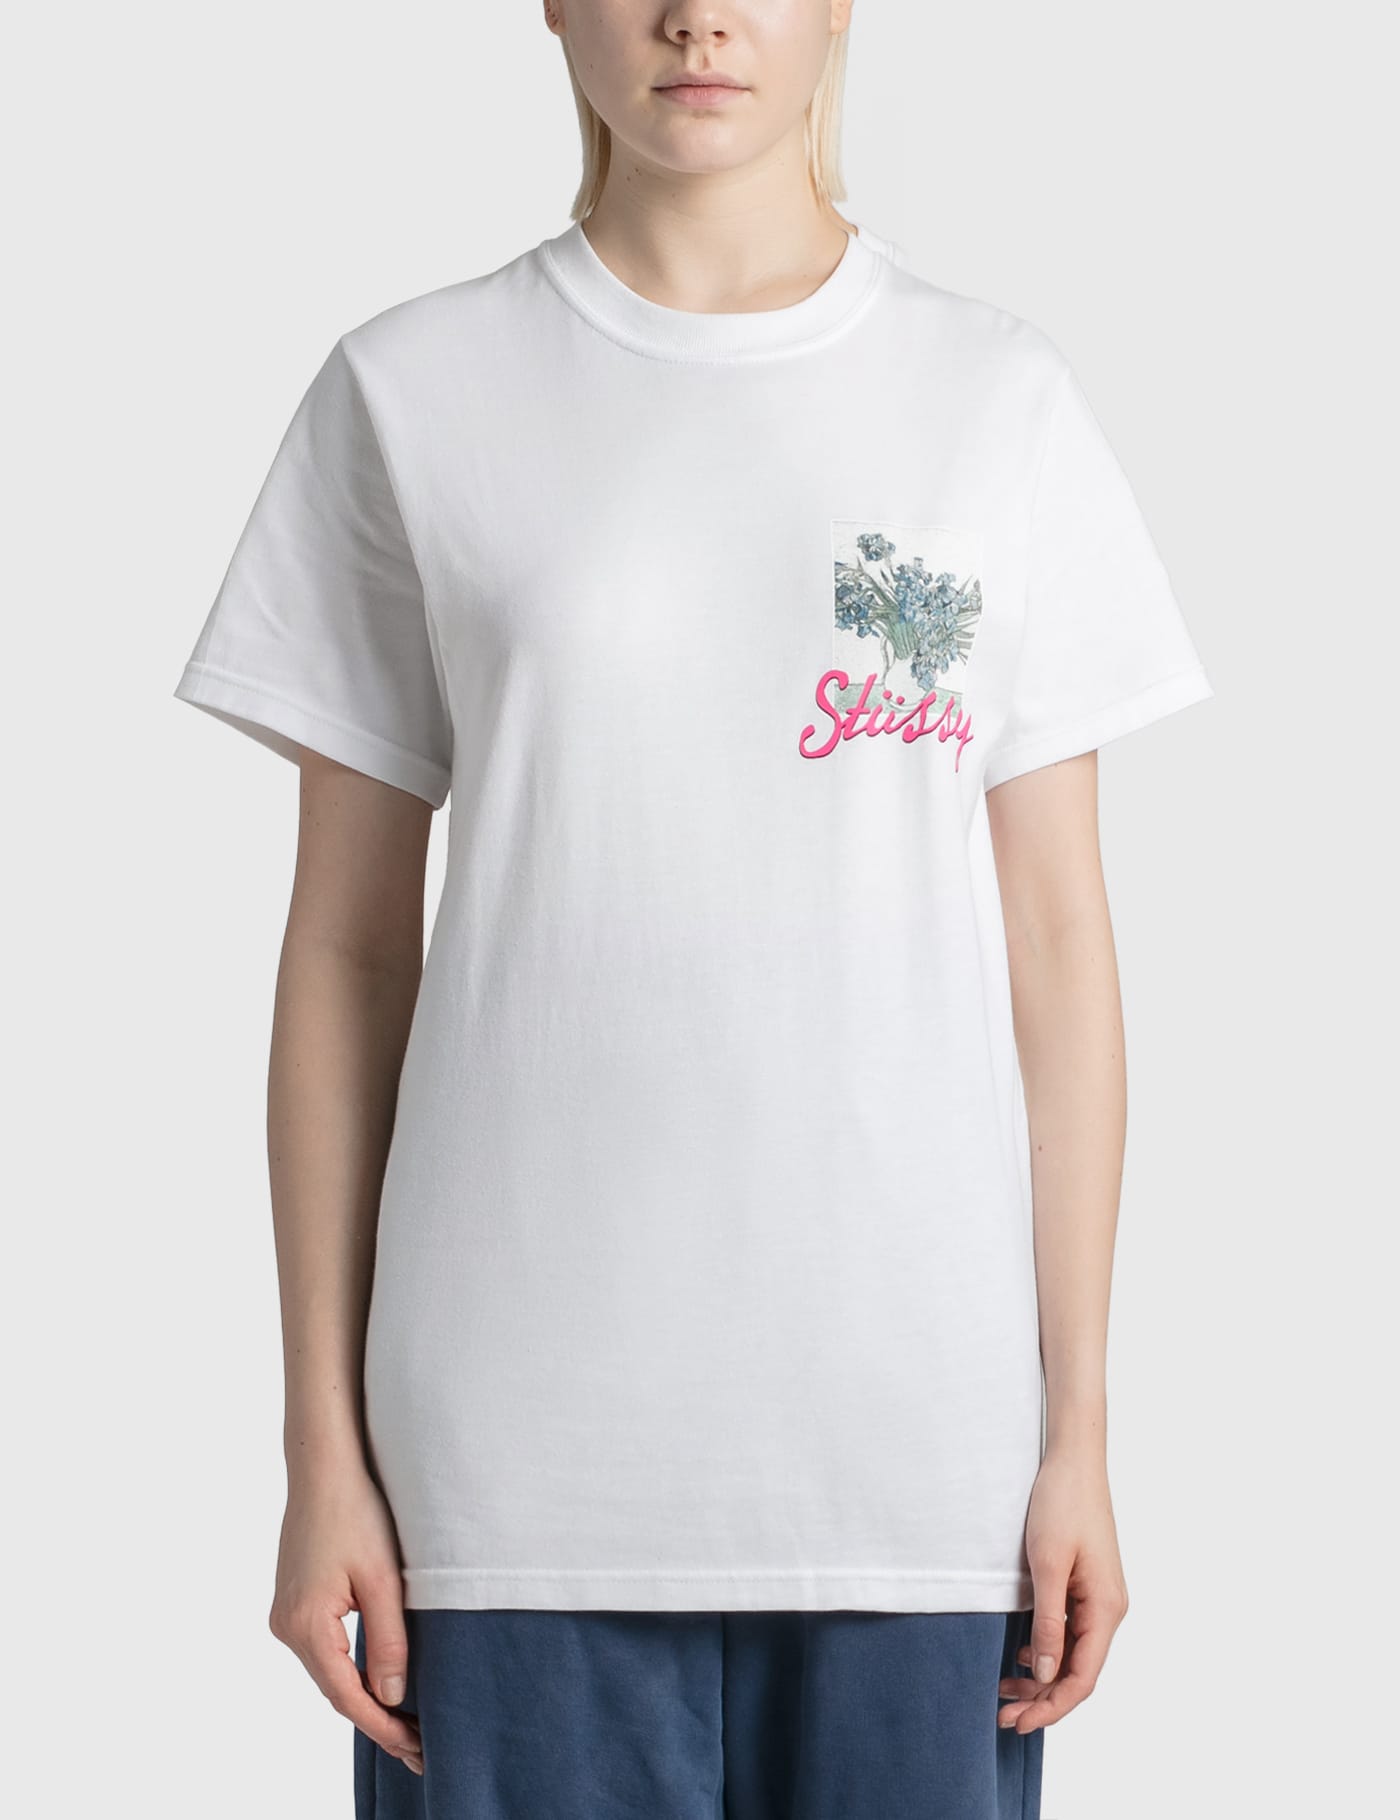 Stussy - Post Modernists T-shirt | HBX - Globally Curated Fashion and  Lifestyle by Hypebeast